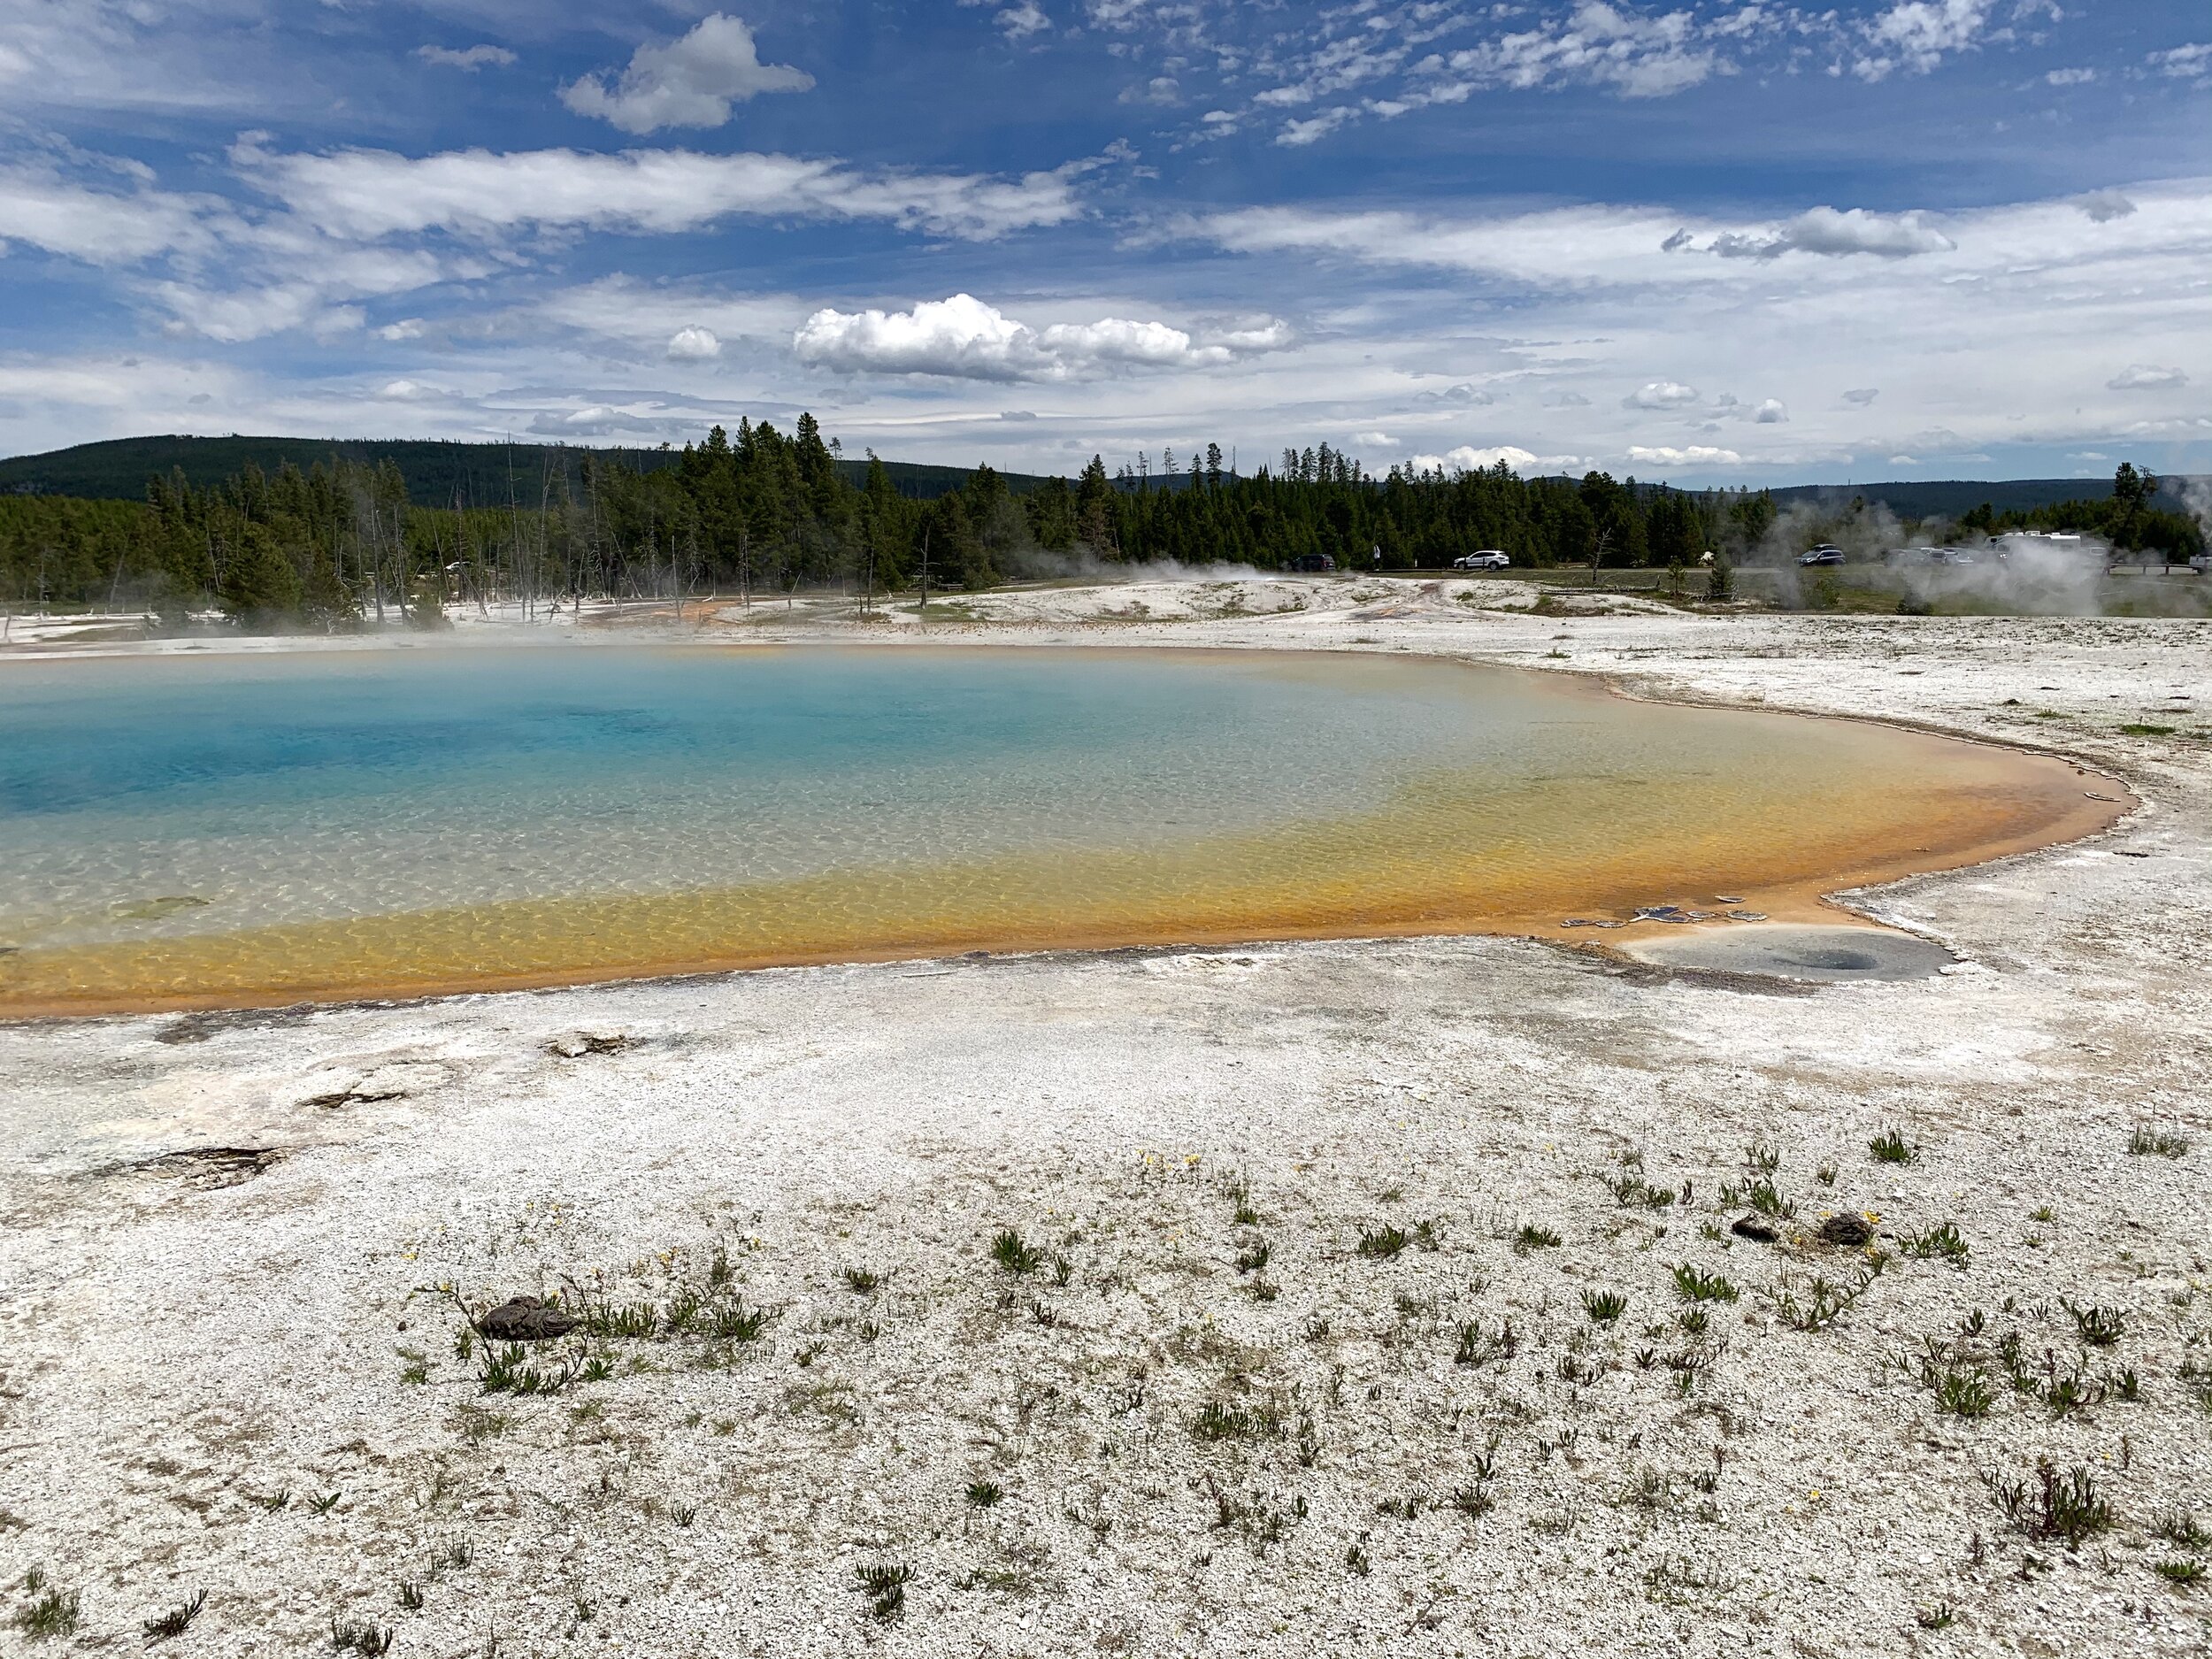  One last picture of the hot springs of Yellowstone.  